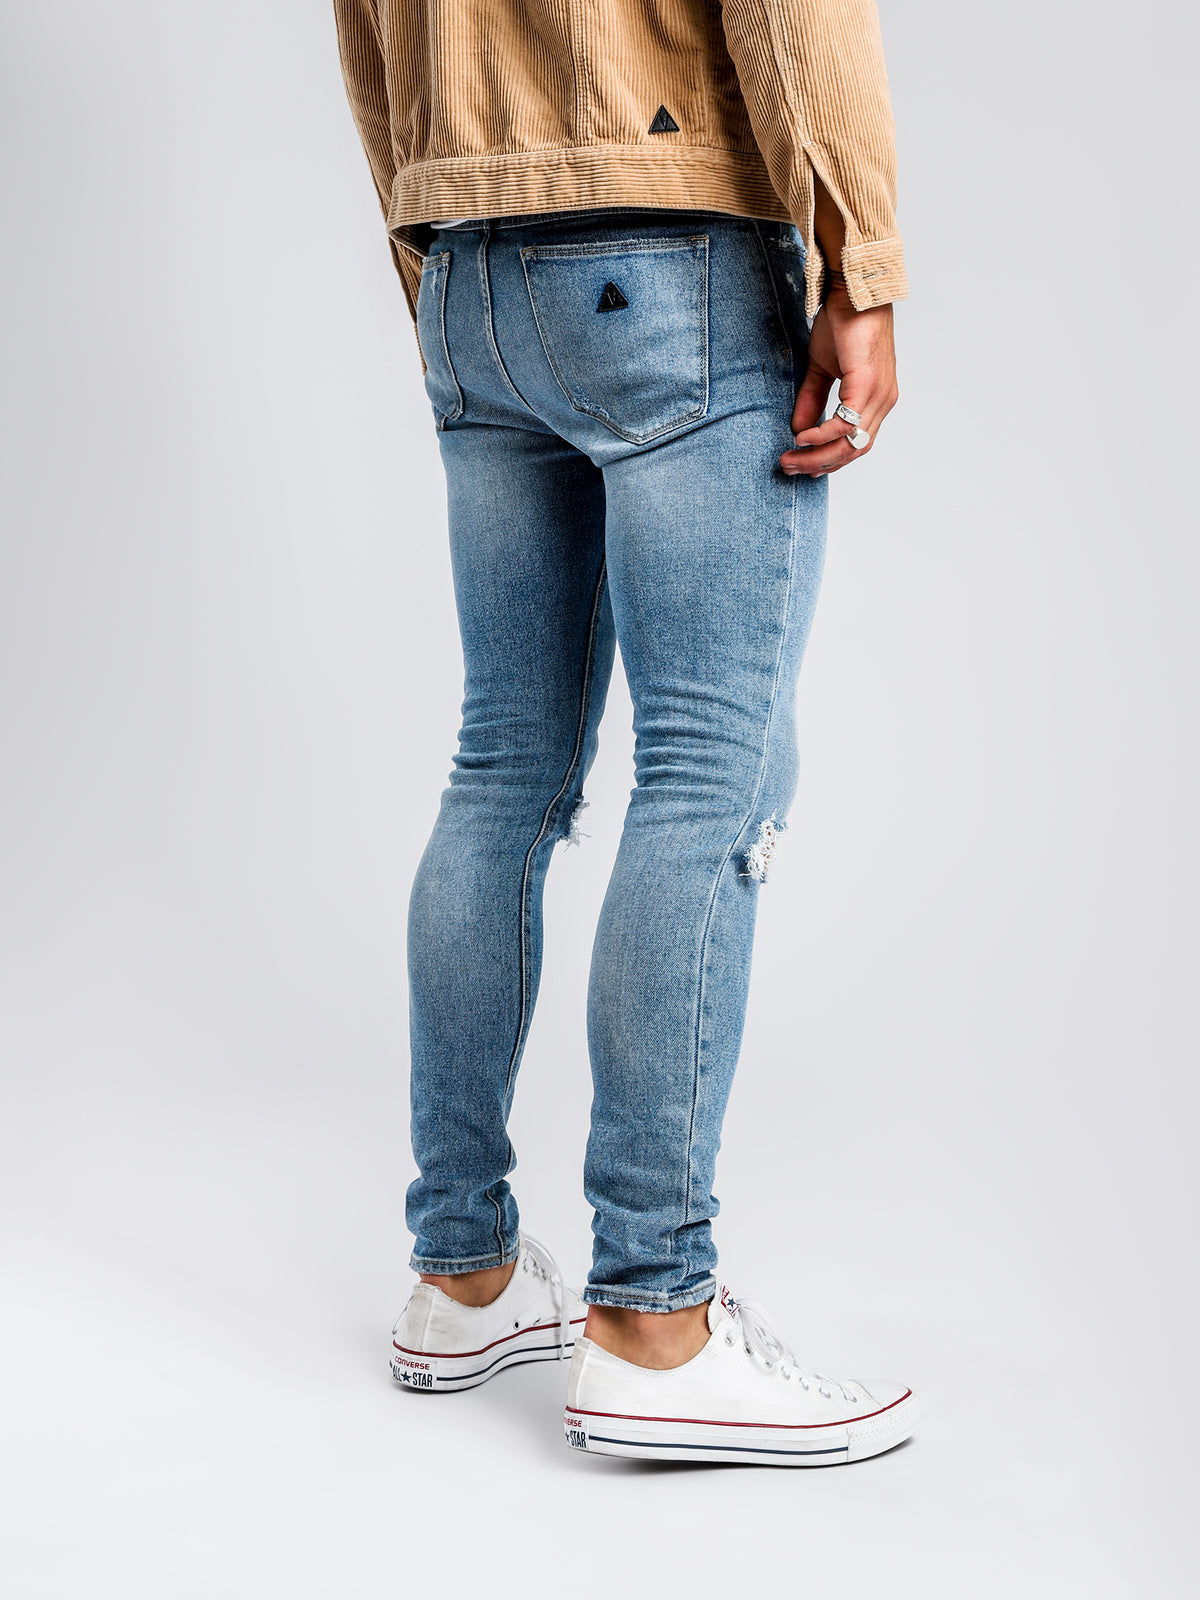 A Dropped Skinny Turn Up Jean in Scuzz Blues Denim